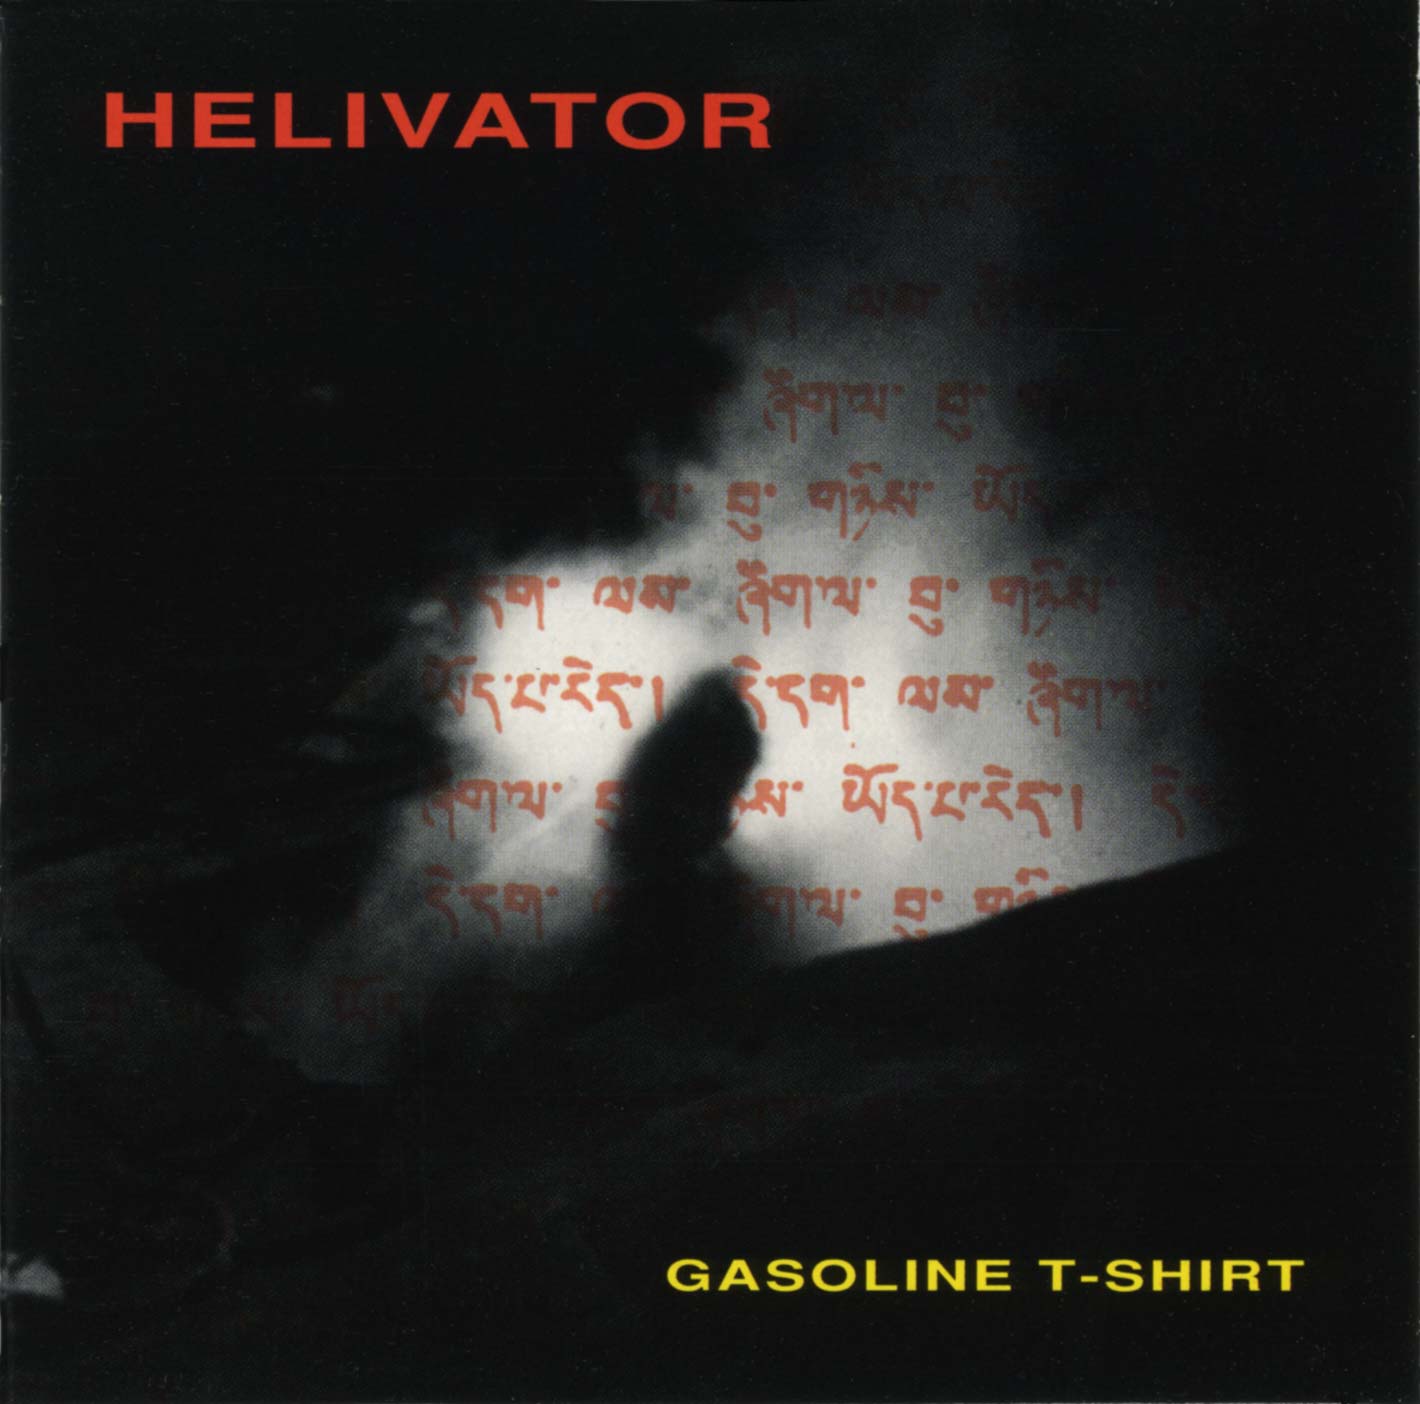 Helivator Gasoline T-Shirt CD - Monoroid